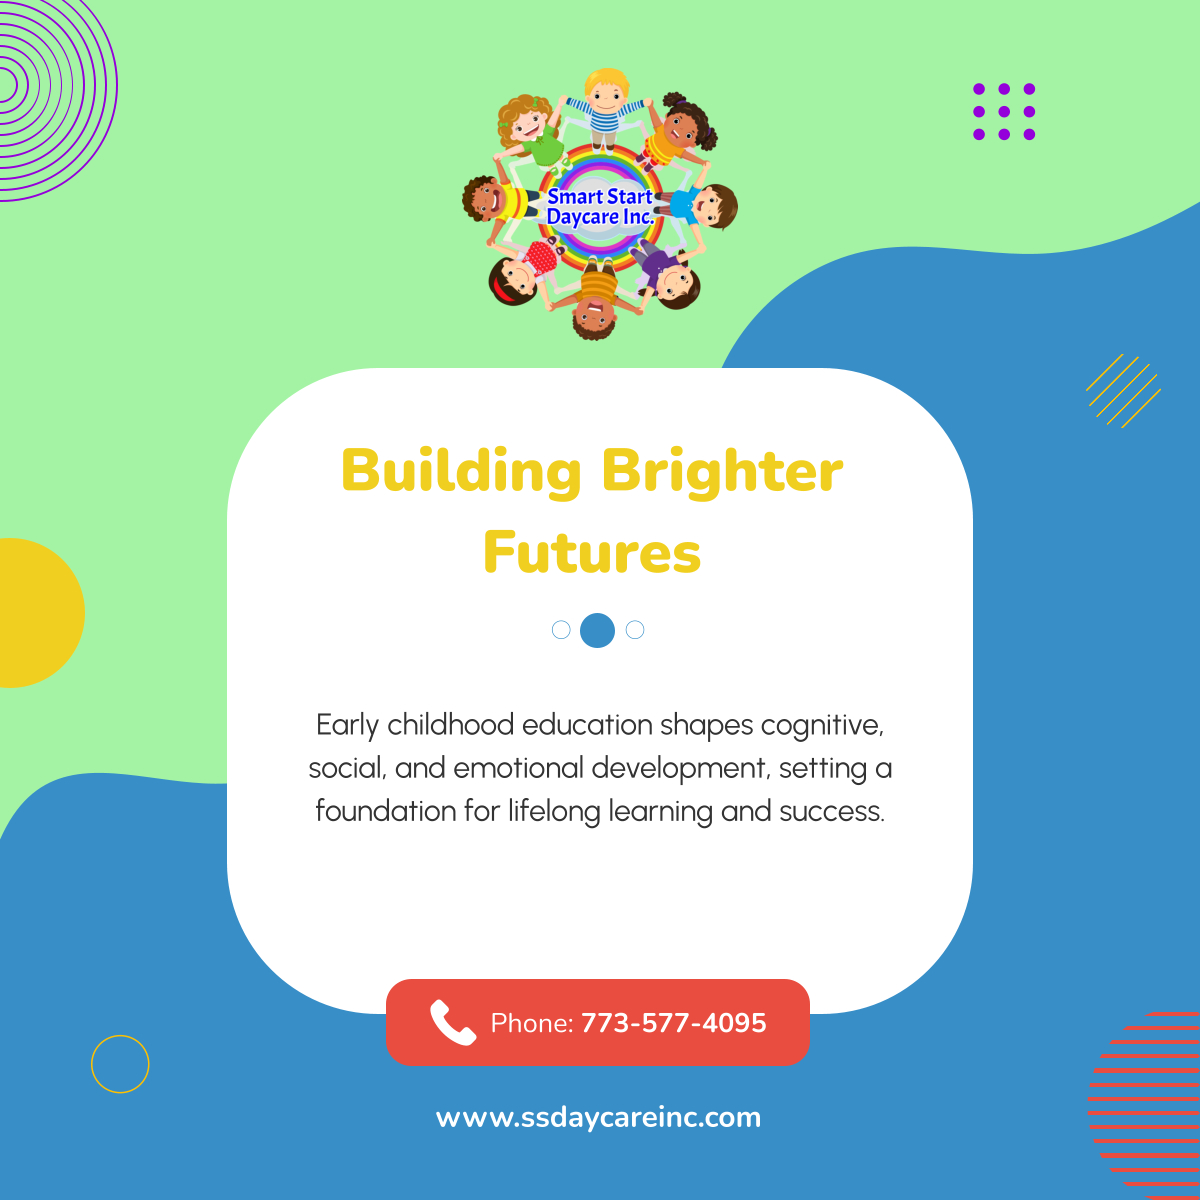 Did you know that early childhood education isn't just about learning ABCs? It's the bedrock for future success, shaping well-rounded and resilient individuals. 

#Childcare #EarlyEducation #FutureSuccess